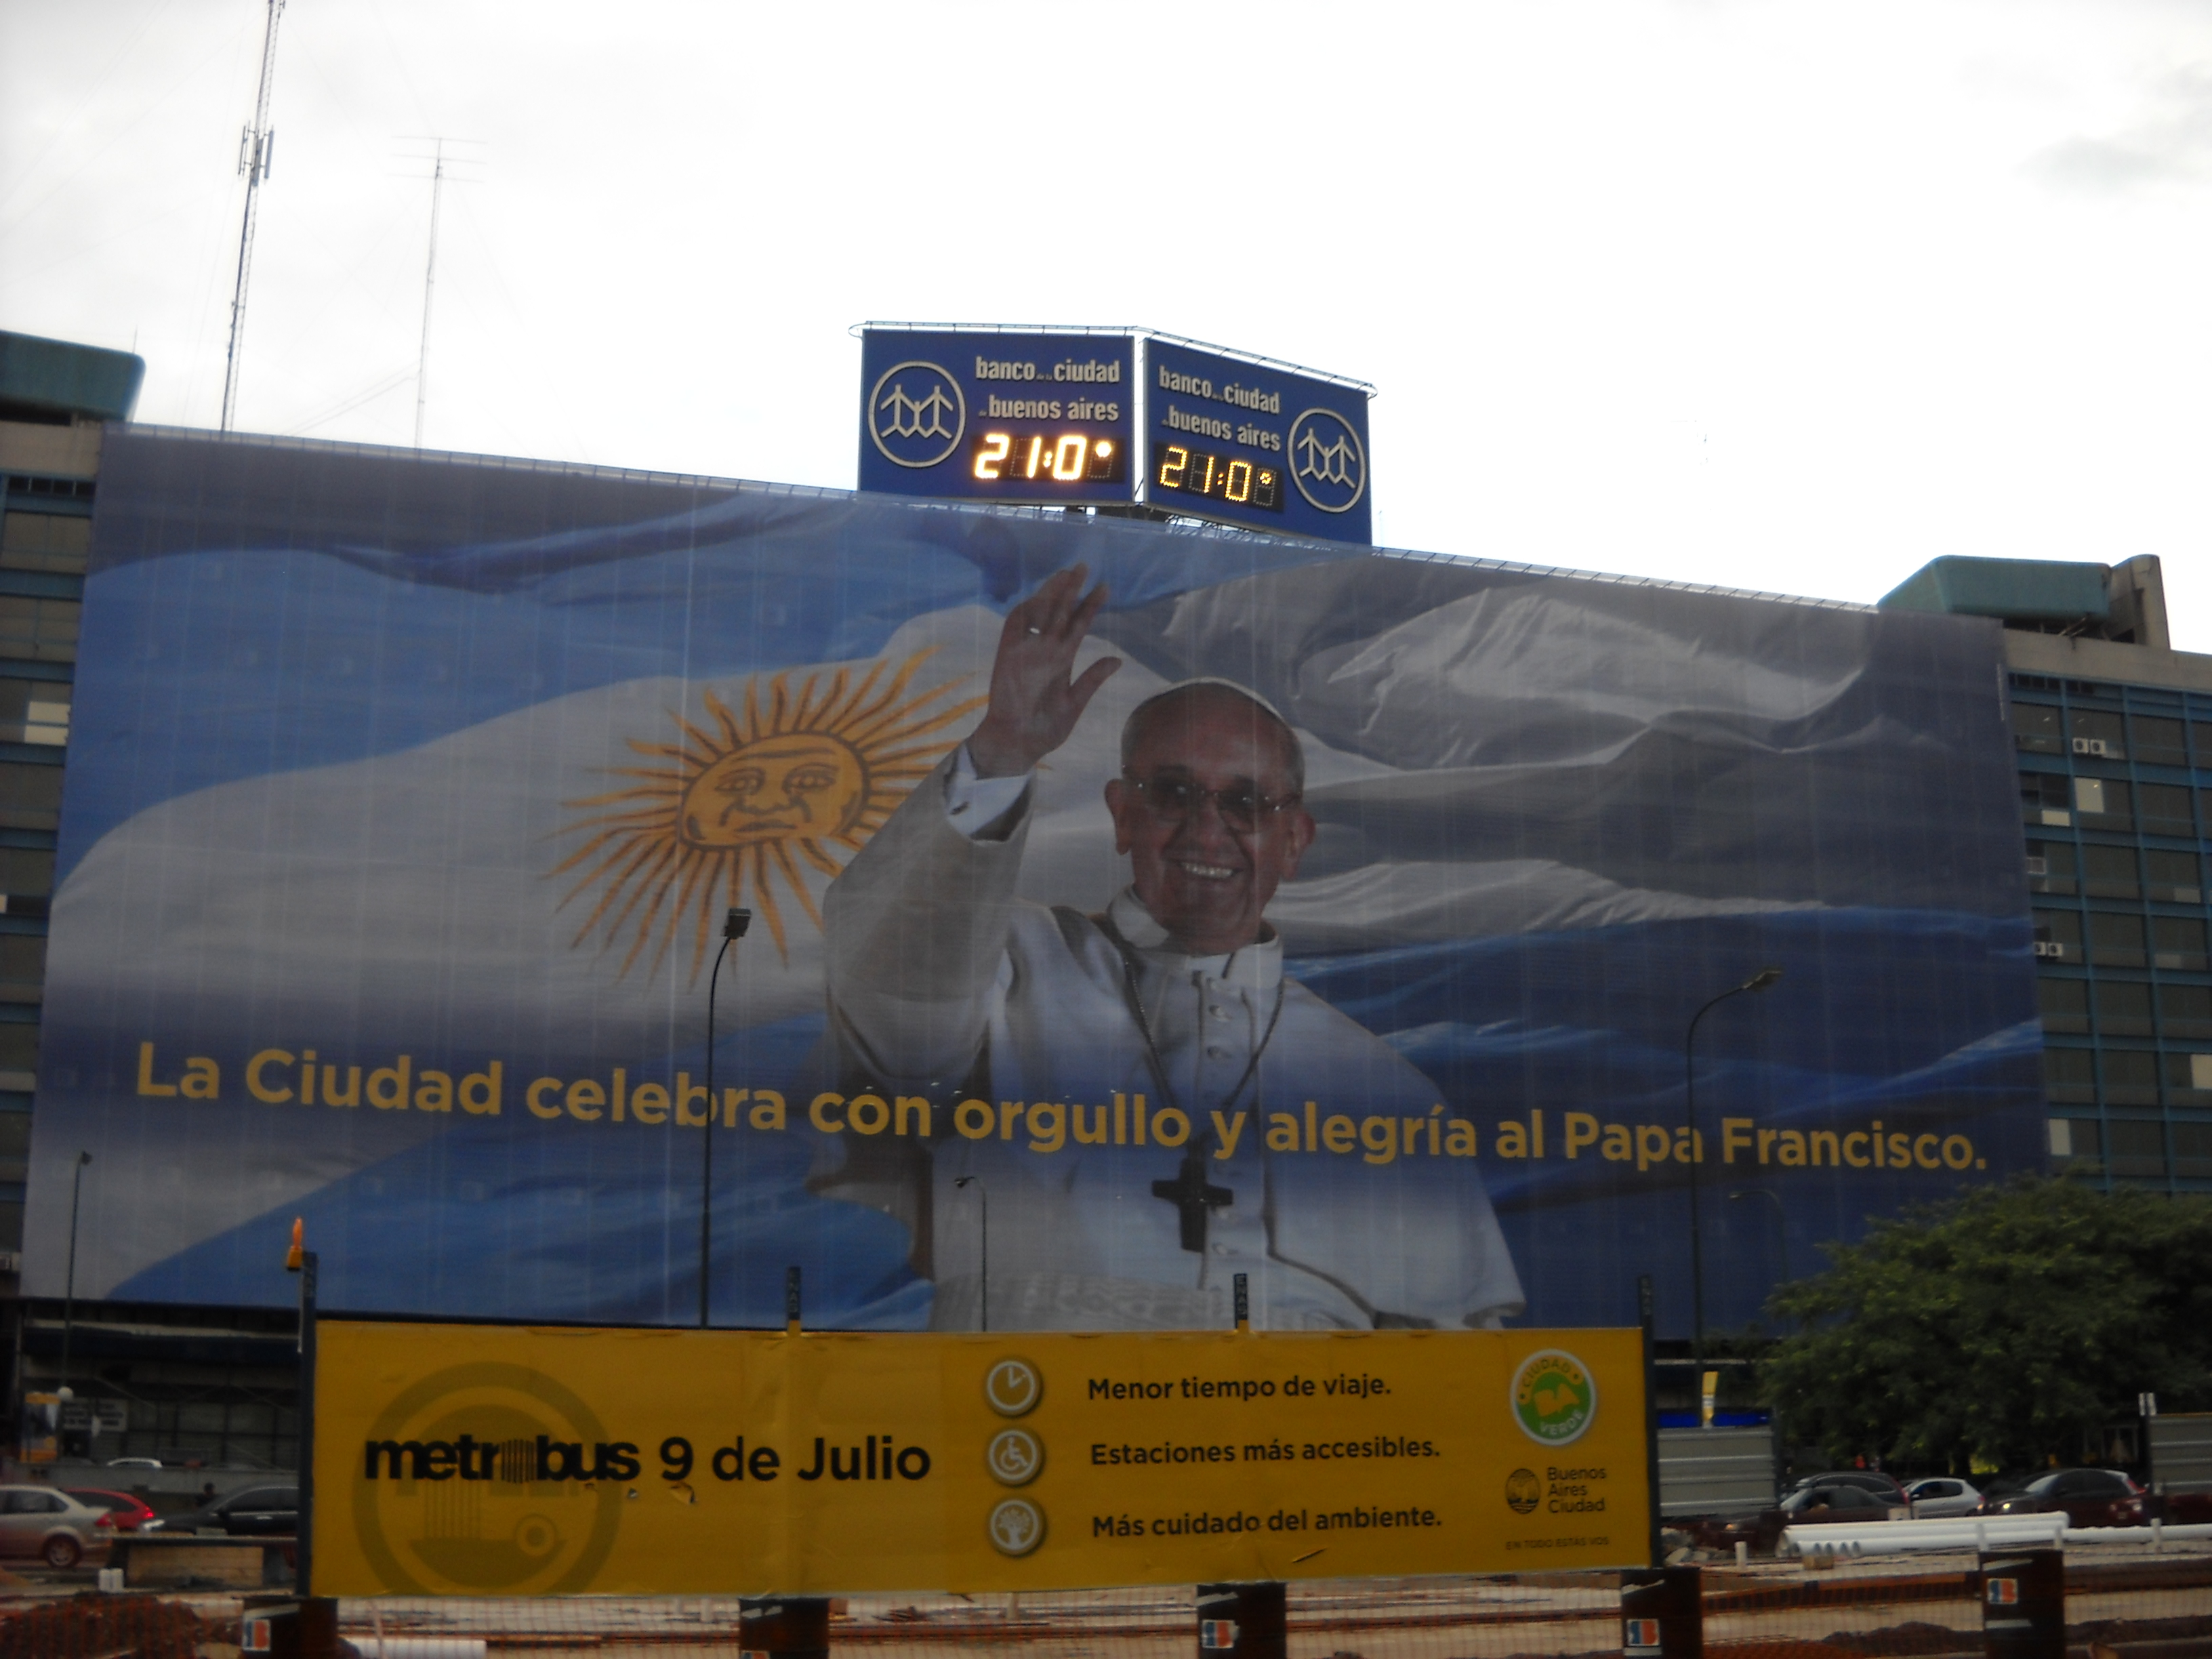 Massive billboard celebrating Pope Francis on side of major city building in downtown Buenos Aires, Argentina